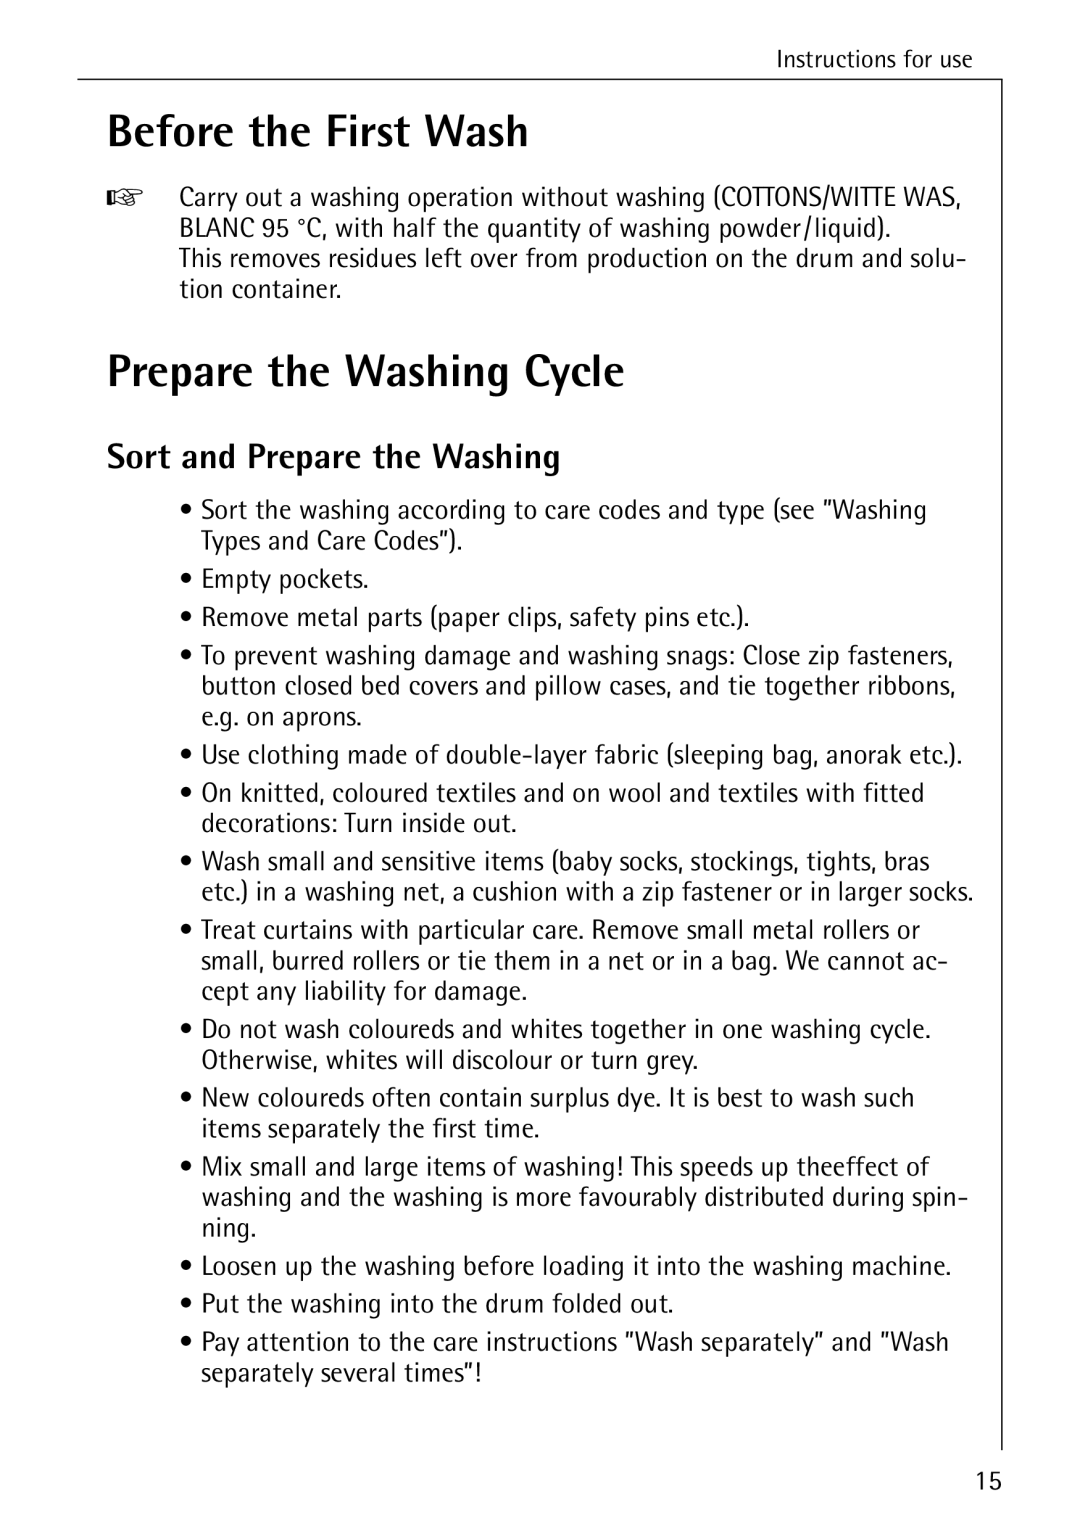 AEG 82730 manual Before the First Wash, Prepare the Washing Cycle, Sort and Prepare the Washing 